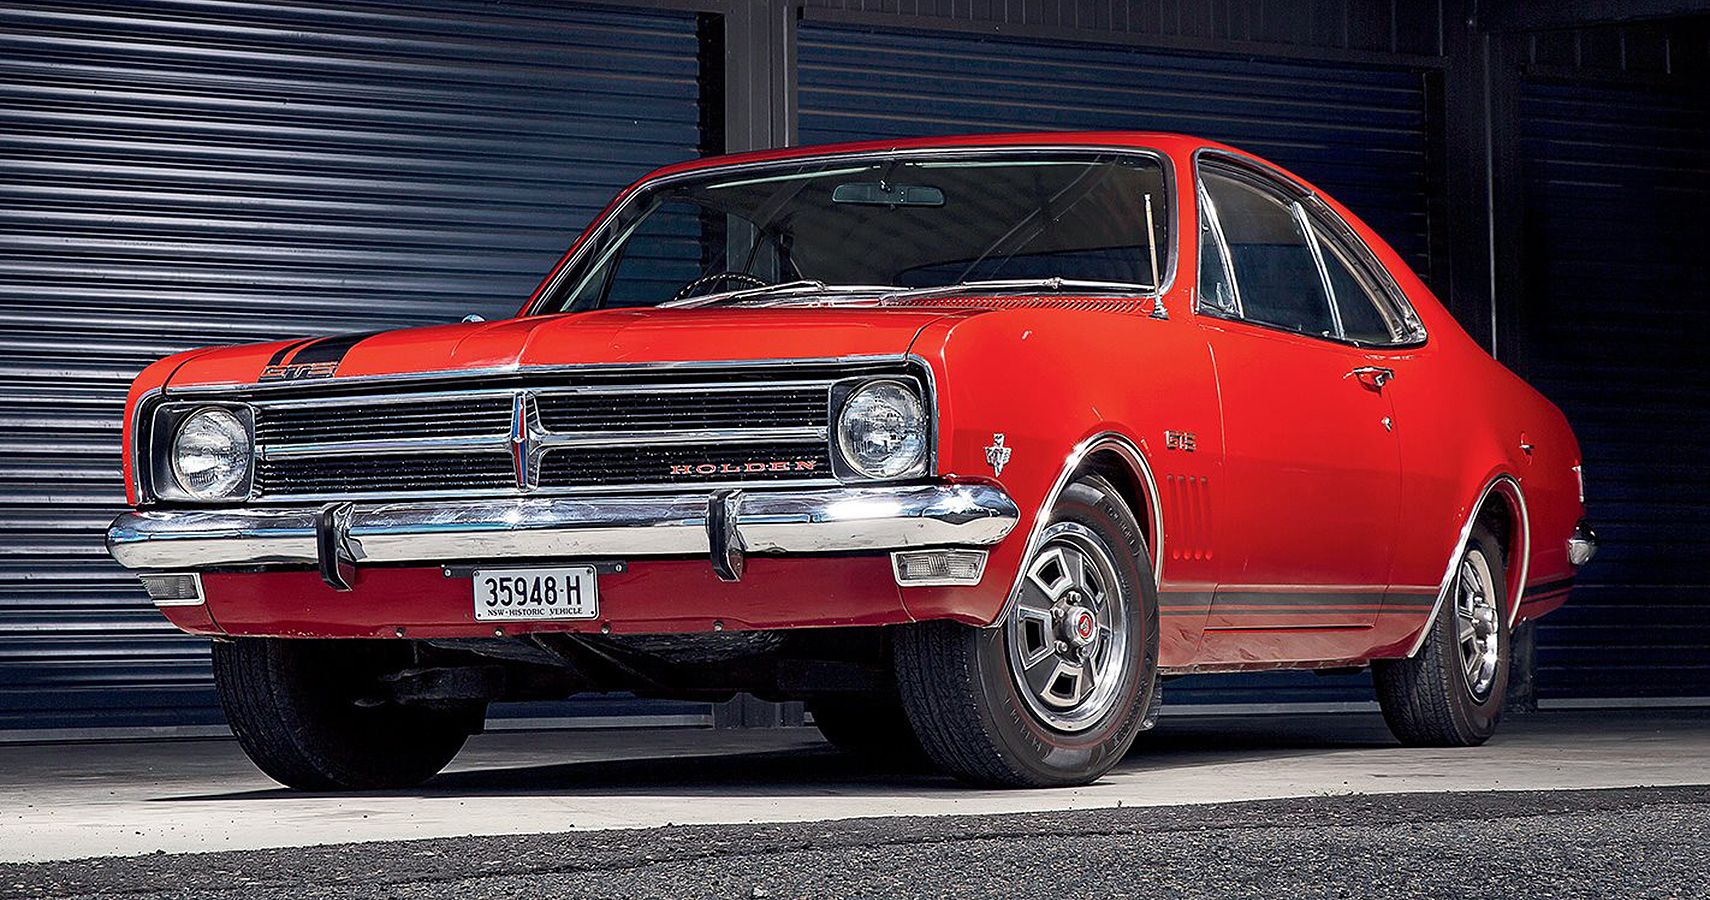 We Badly Want: The Holden HK Monaro GTS From Australia